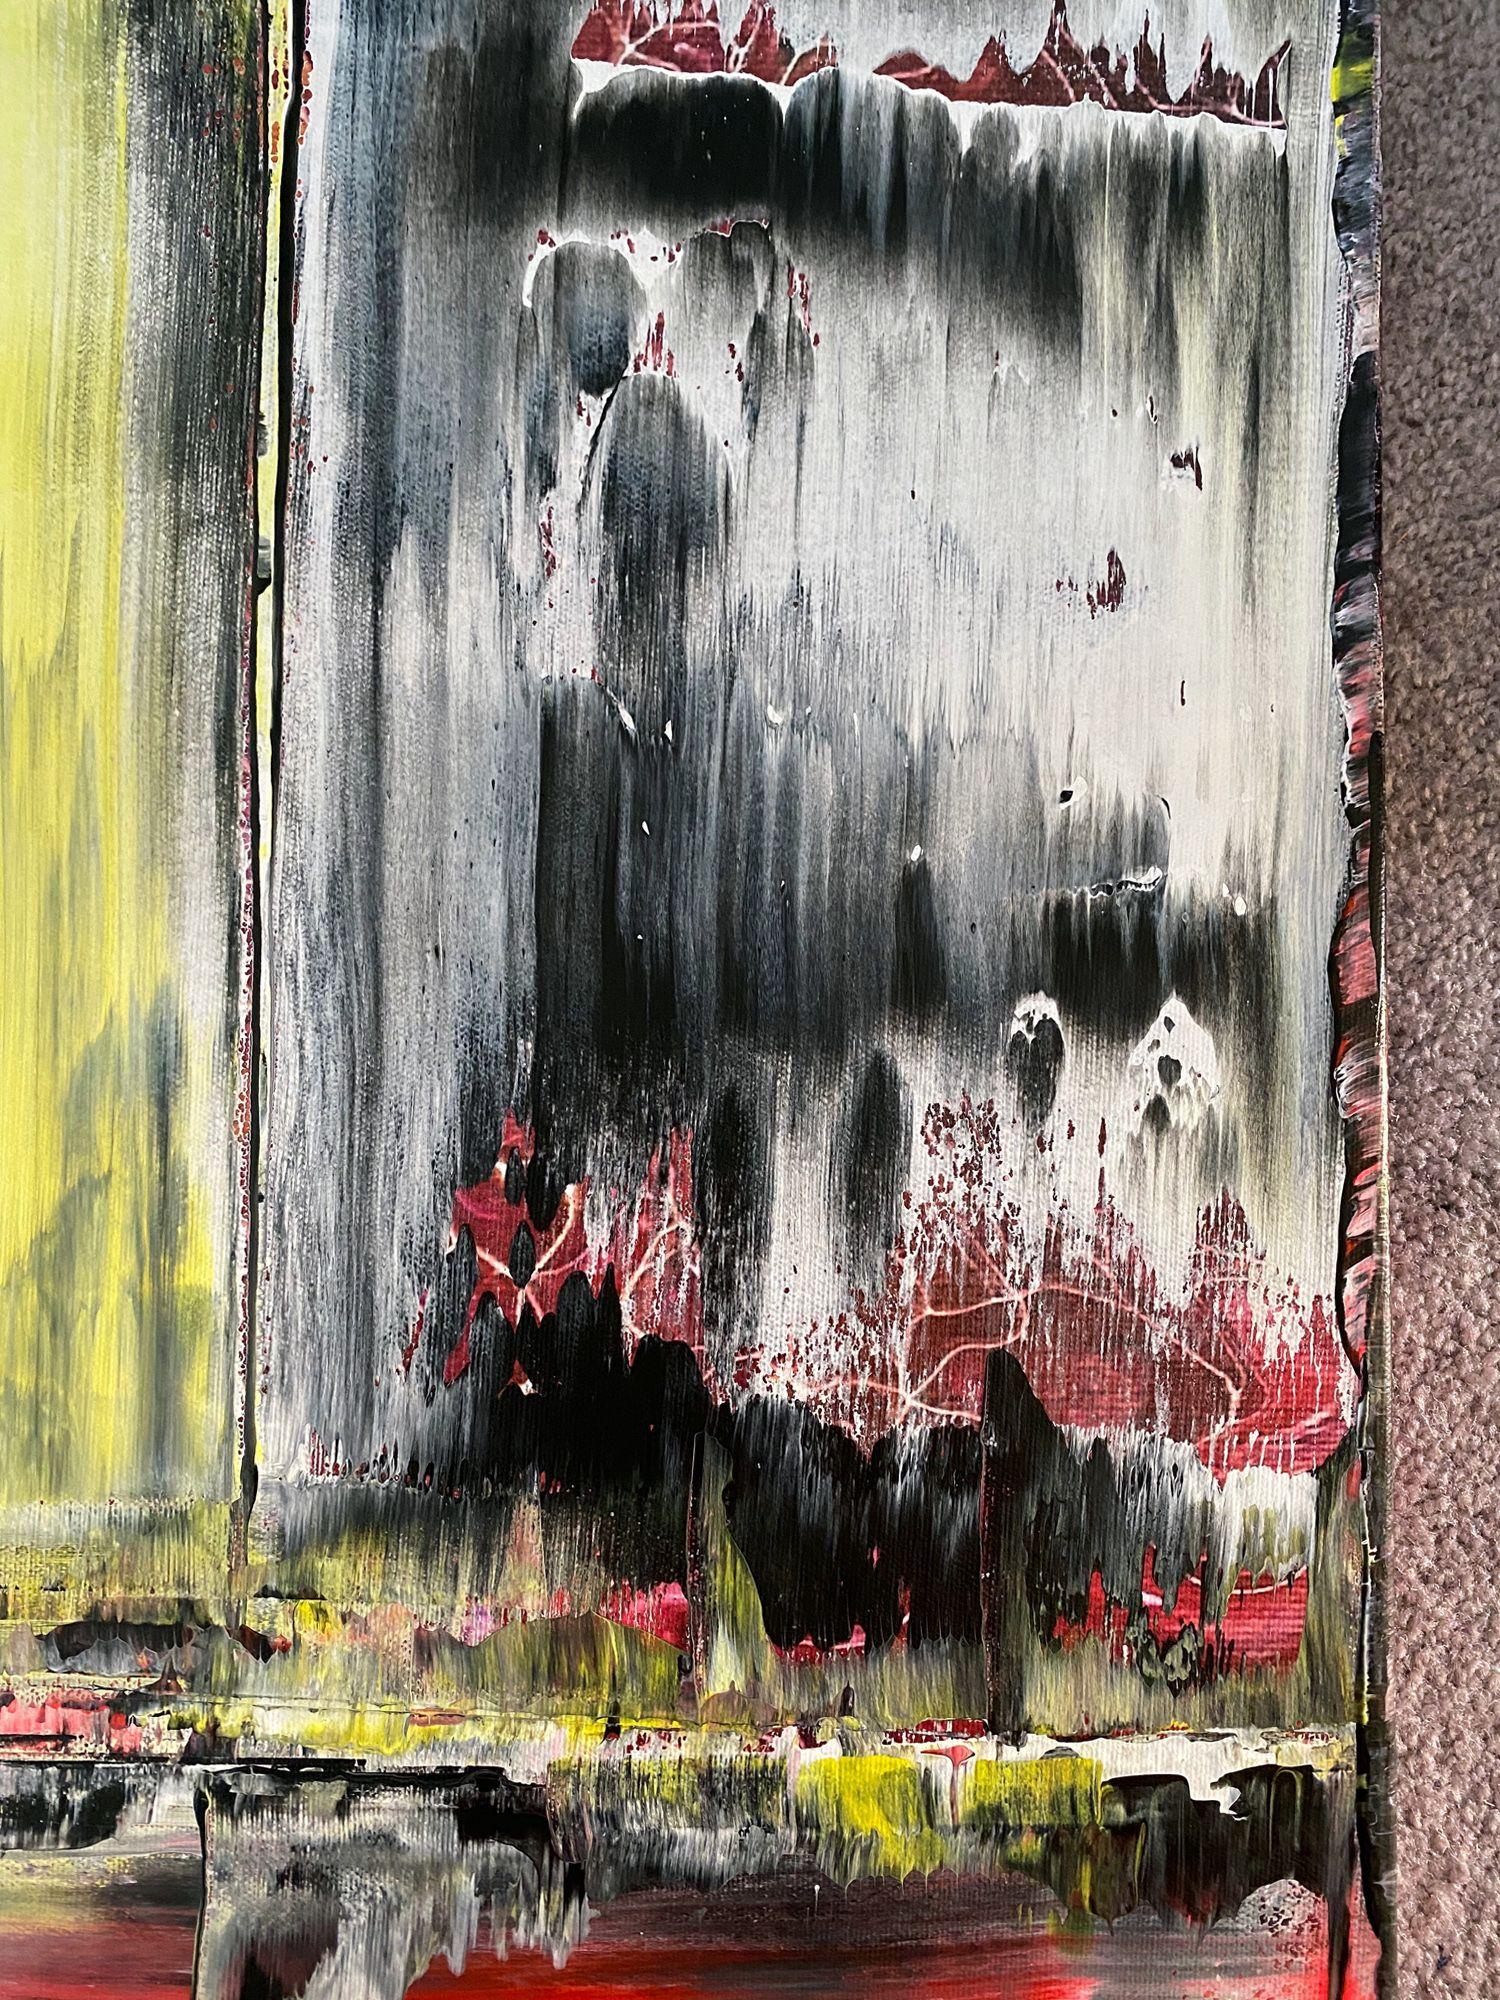 This is a unique large PMS abstract acrylic painting that will make a statement in your home or office. This piece has a mature, modern design aesthetic. This piece is fierce and full of energy and angst. The colors streak and overlap, while also